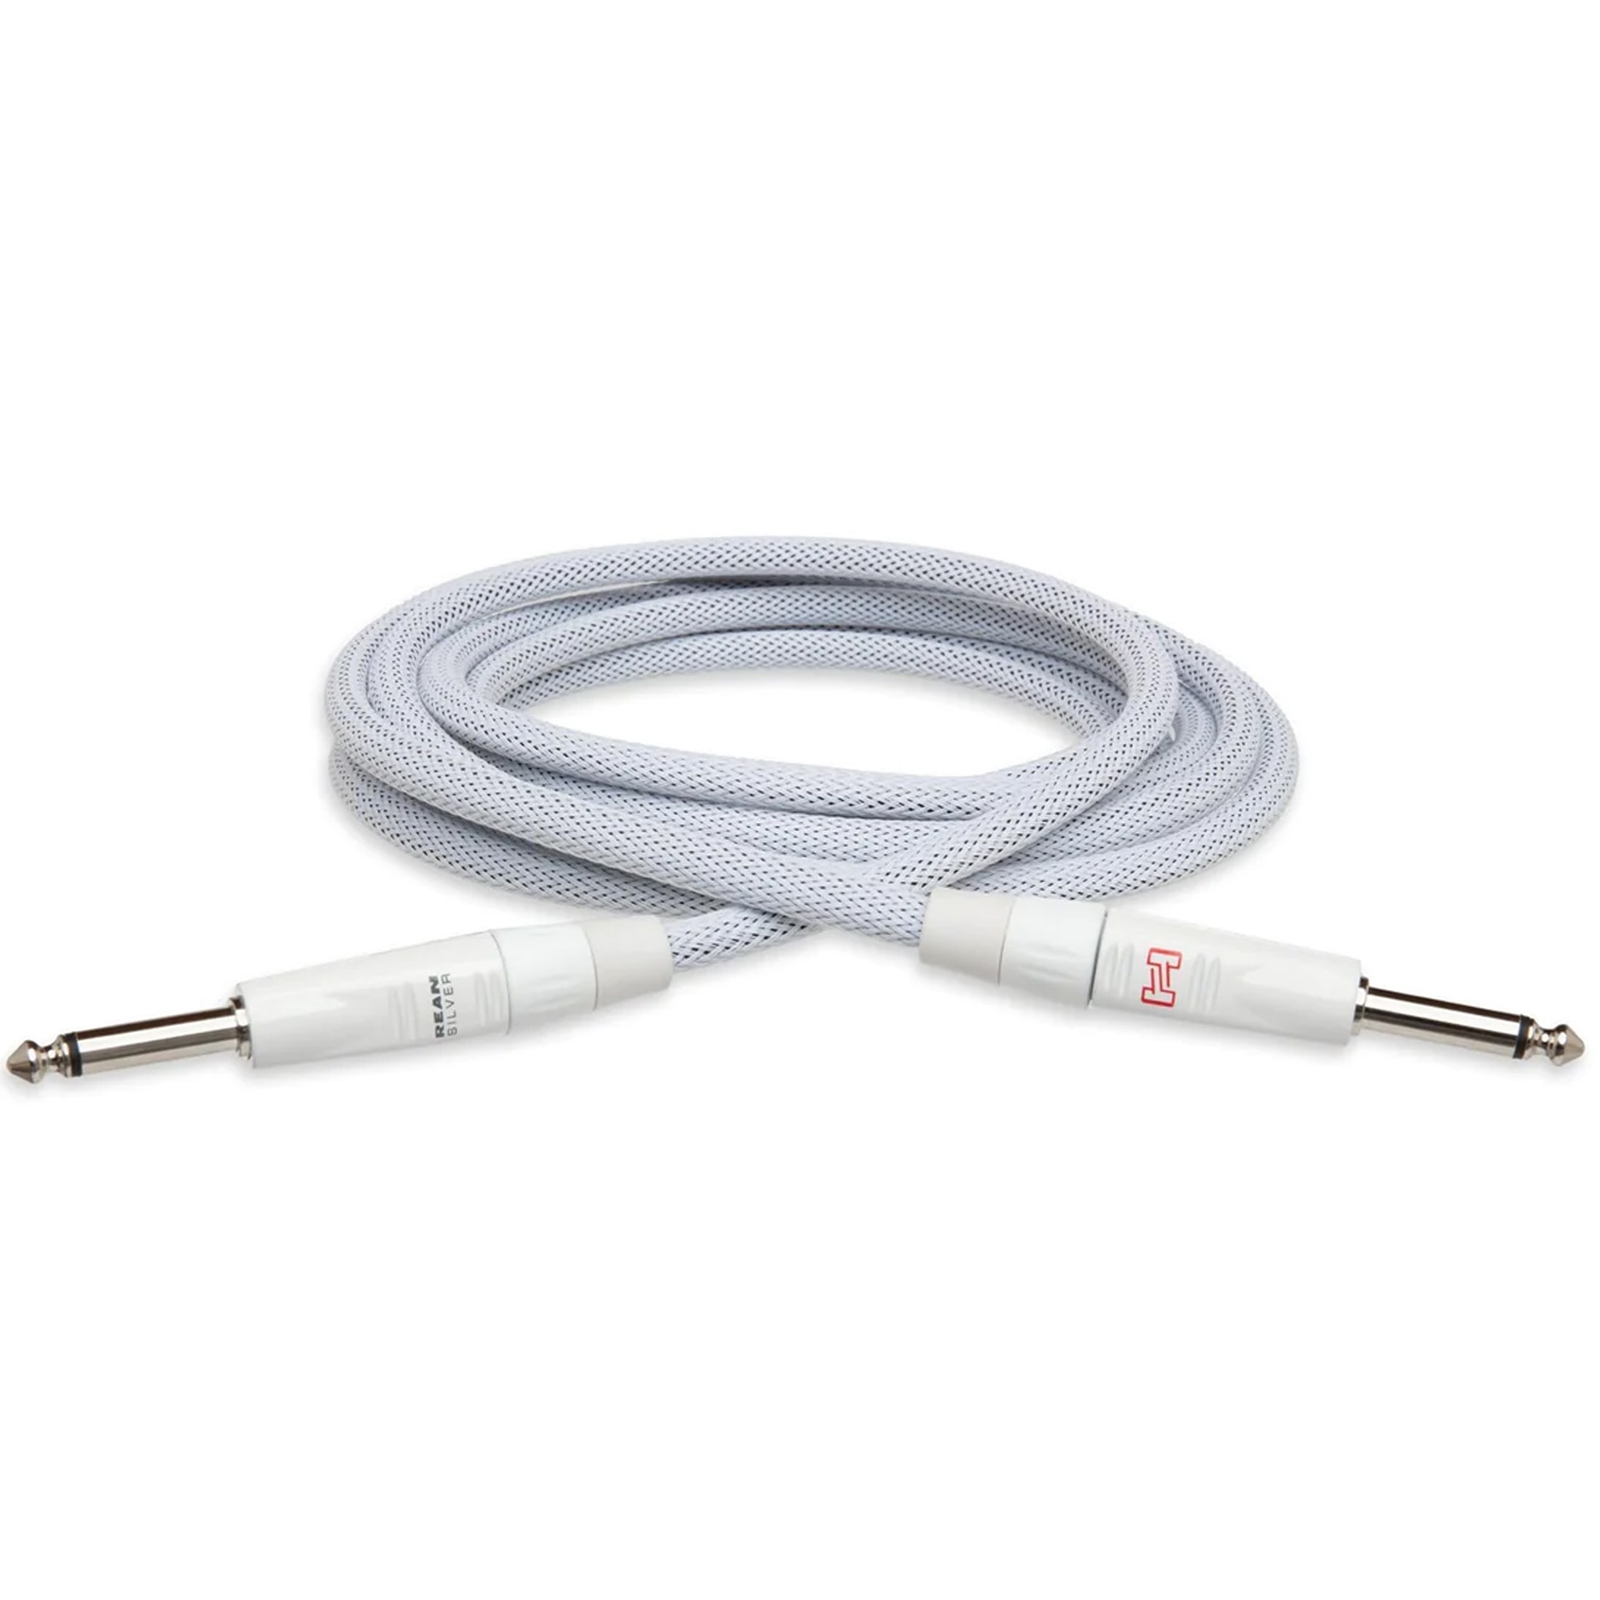 Hosa Limited Edition Pro Guitar Cable - Limited Edition White, 10 ft